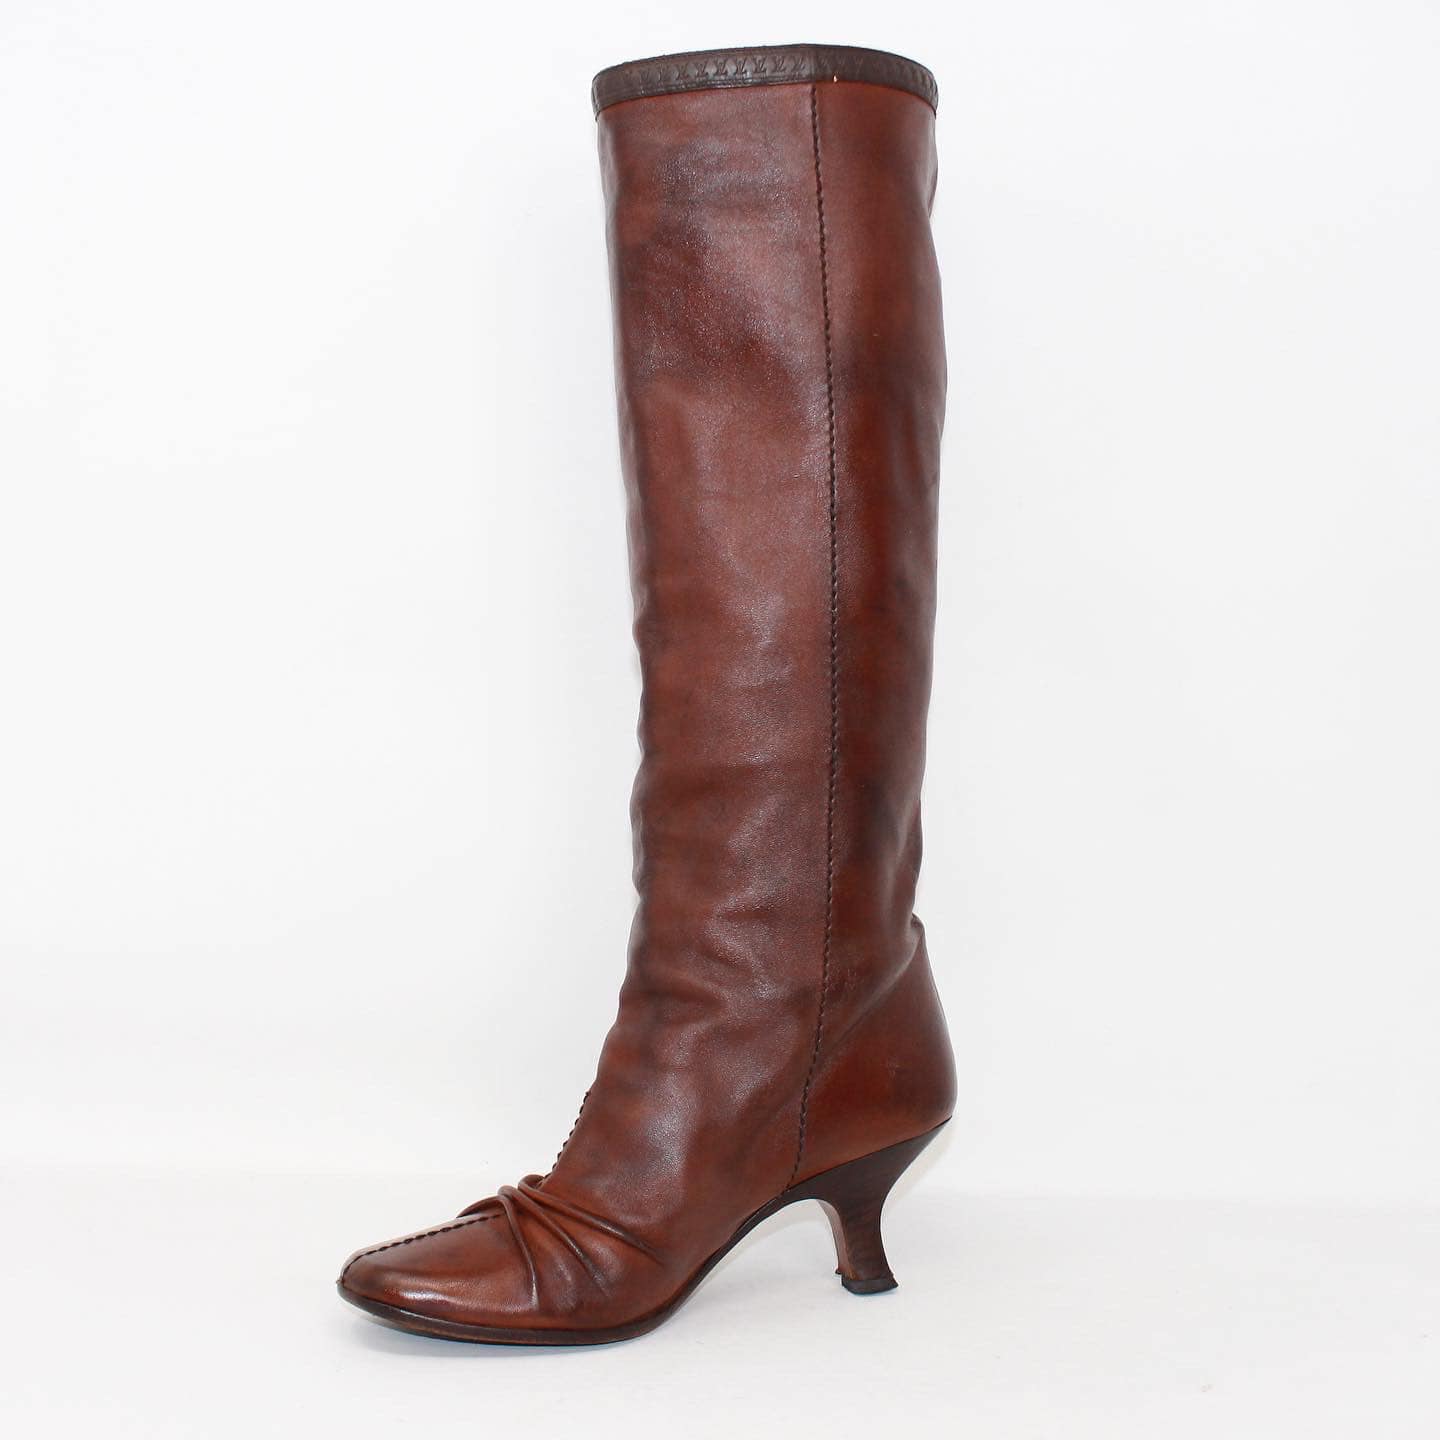 Louis Vuitton Brown Leather Knee High Riding Boots Size 39.5